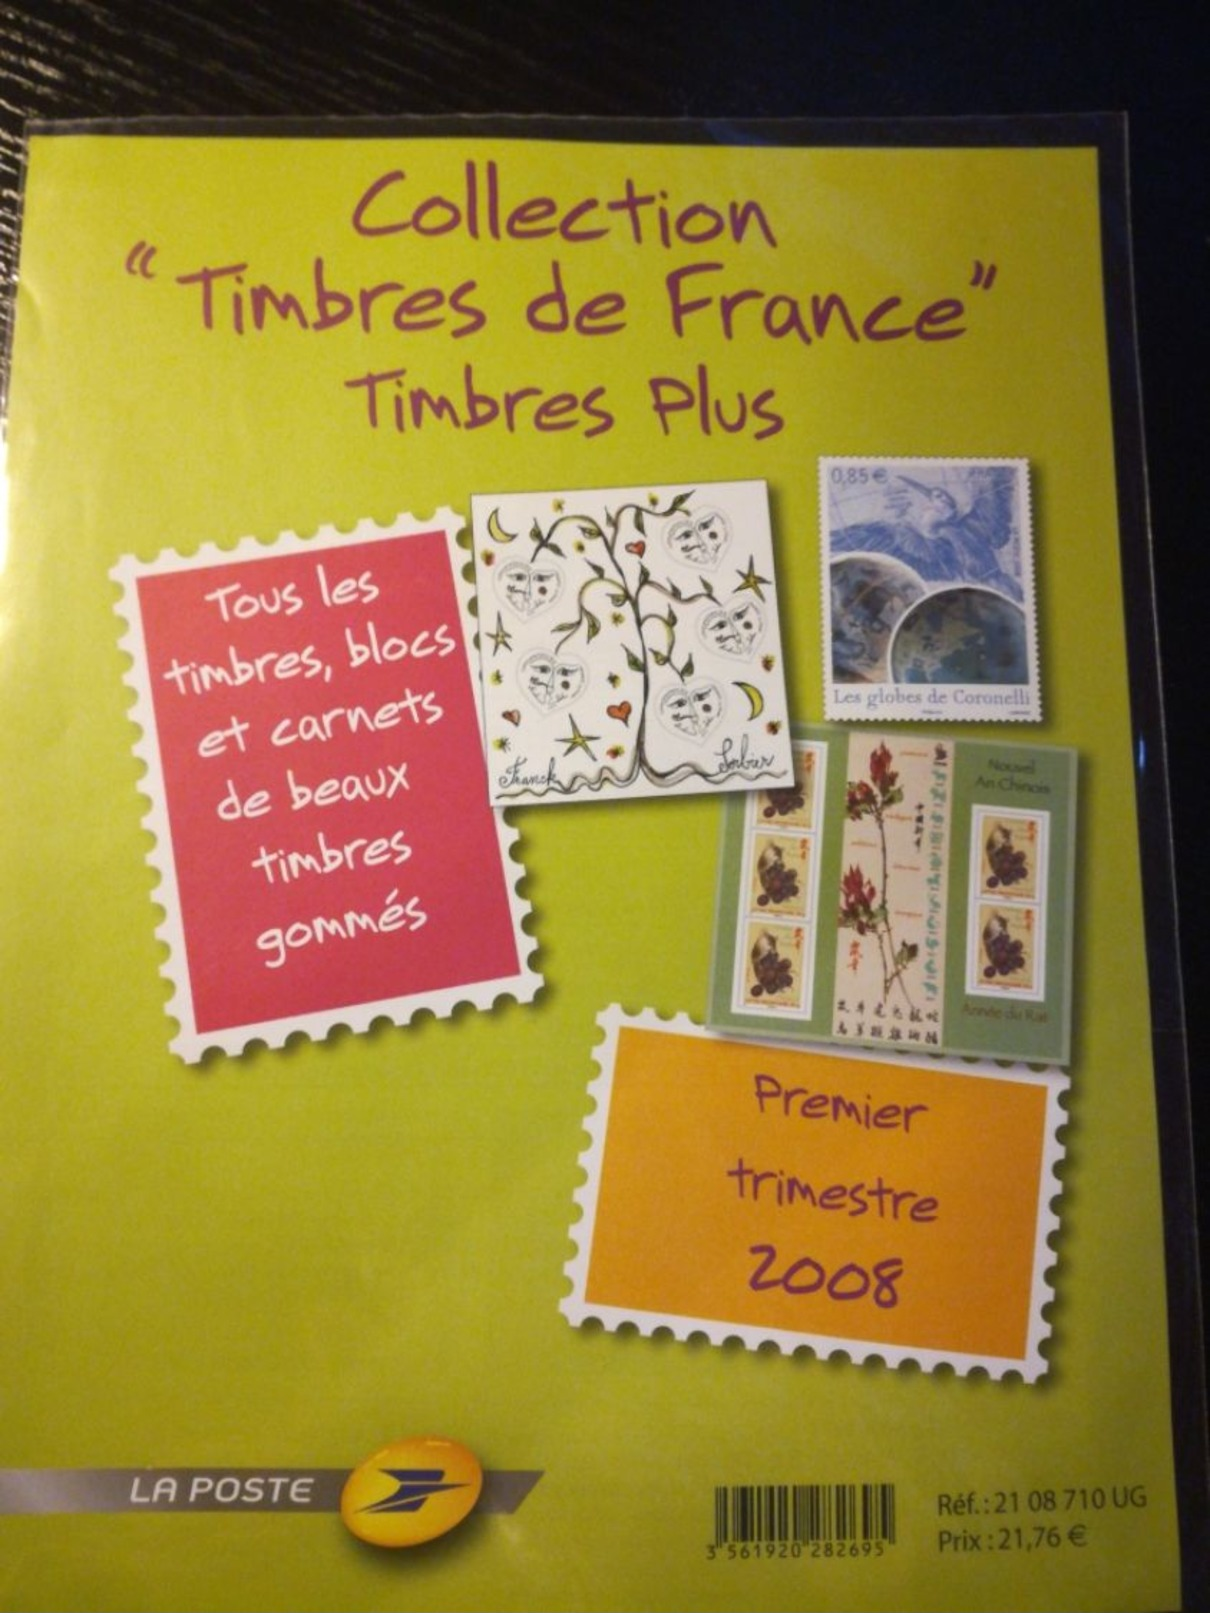 1e Trim 2008 Collection "Timbres De France" Timbres Plus Neufs | Chinois | Coronelli | Sorbier | Droopy - Neufs